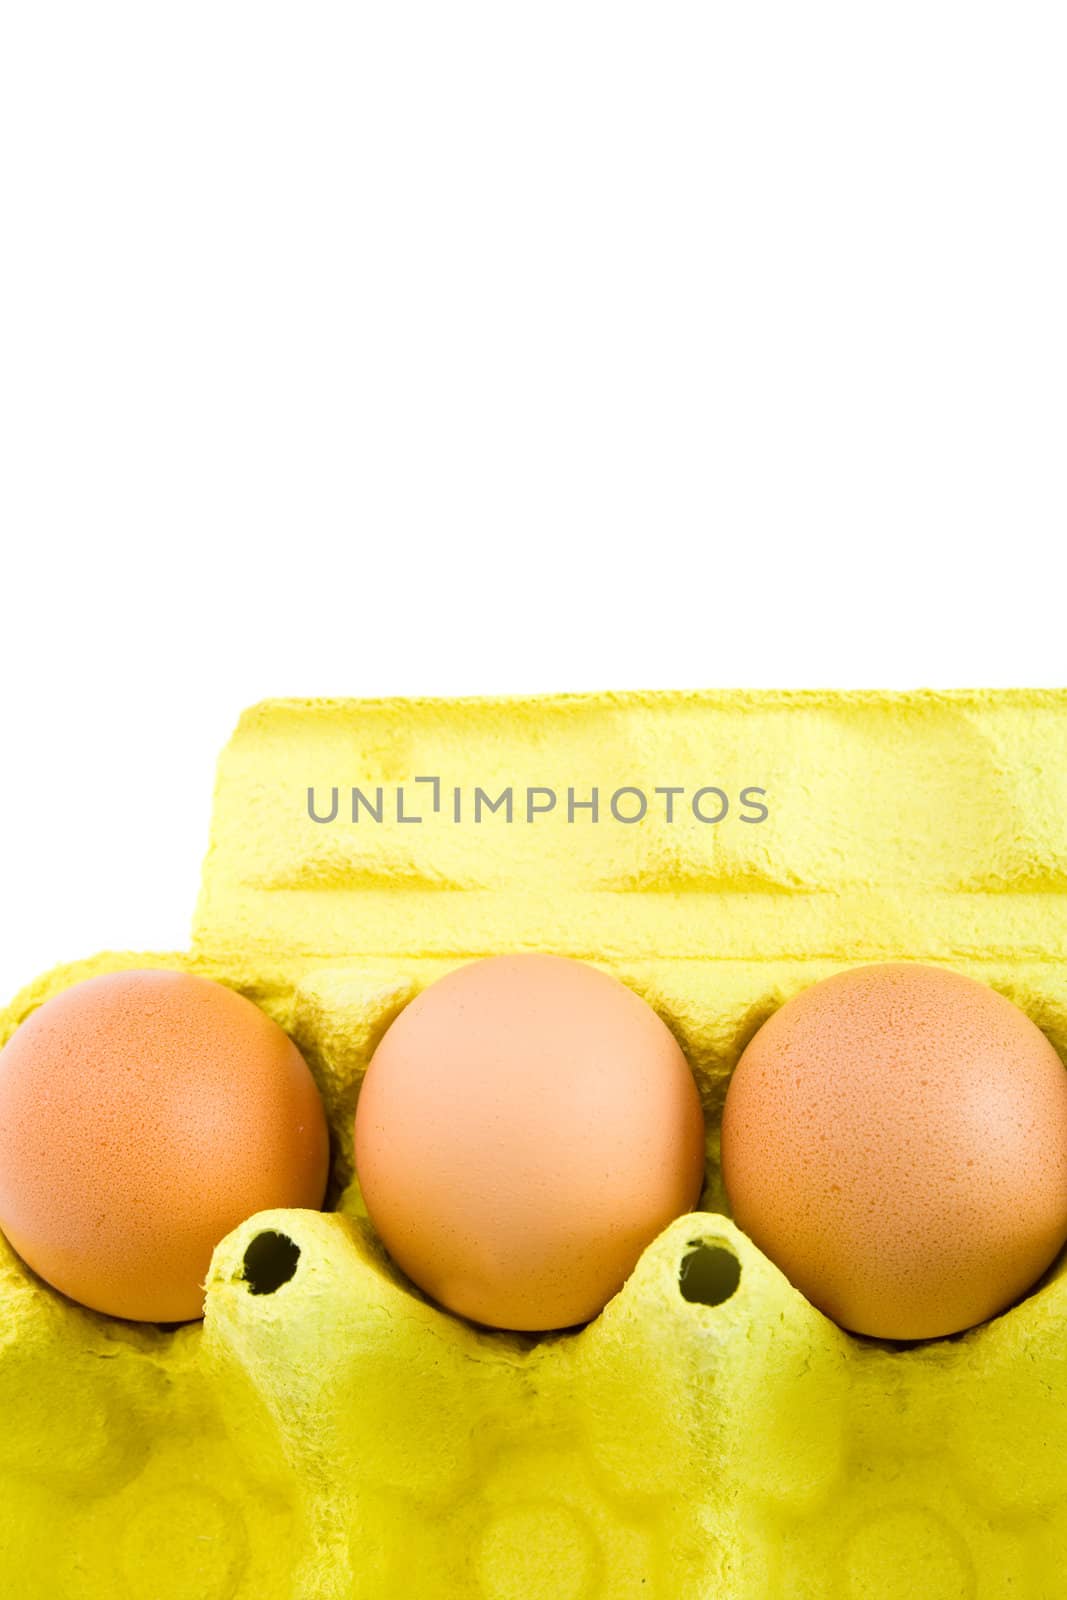 Carton of few eggs in a cardboard box. Isolated on white background.